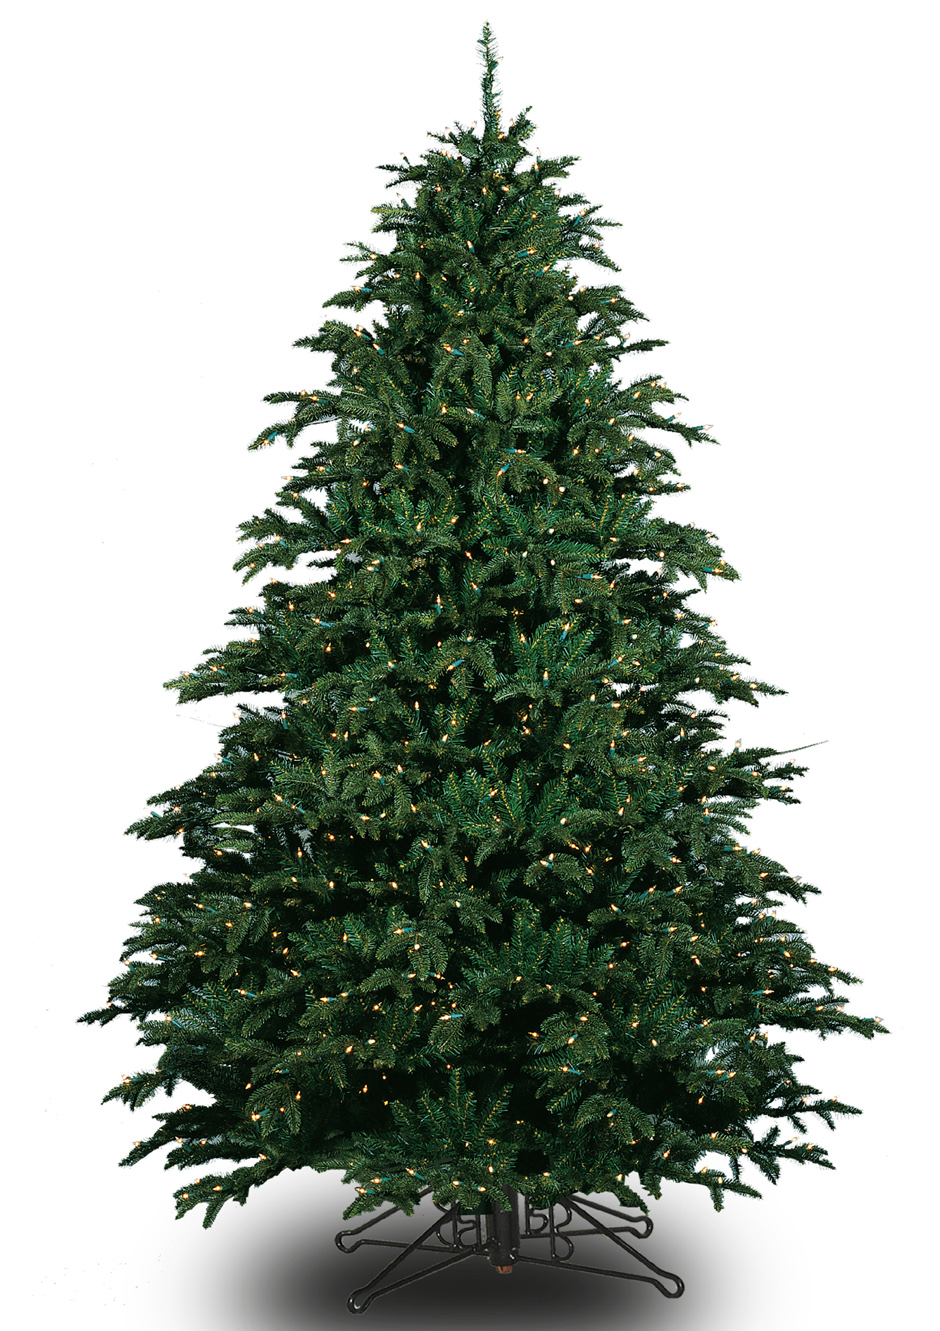 Alaskan Deluxe Christmas Tree - Warm White LED Lights - One-Plug Power Supply - 7.5ft Tall